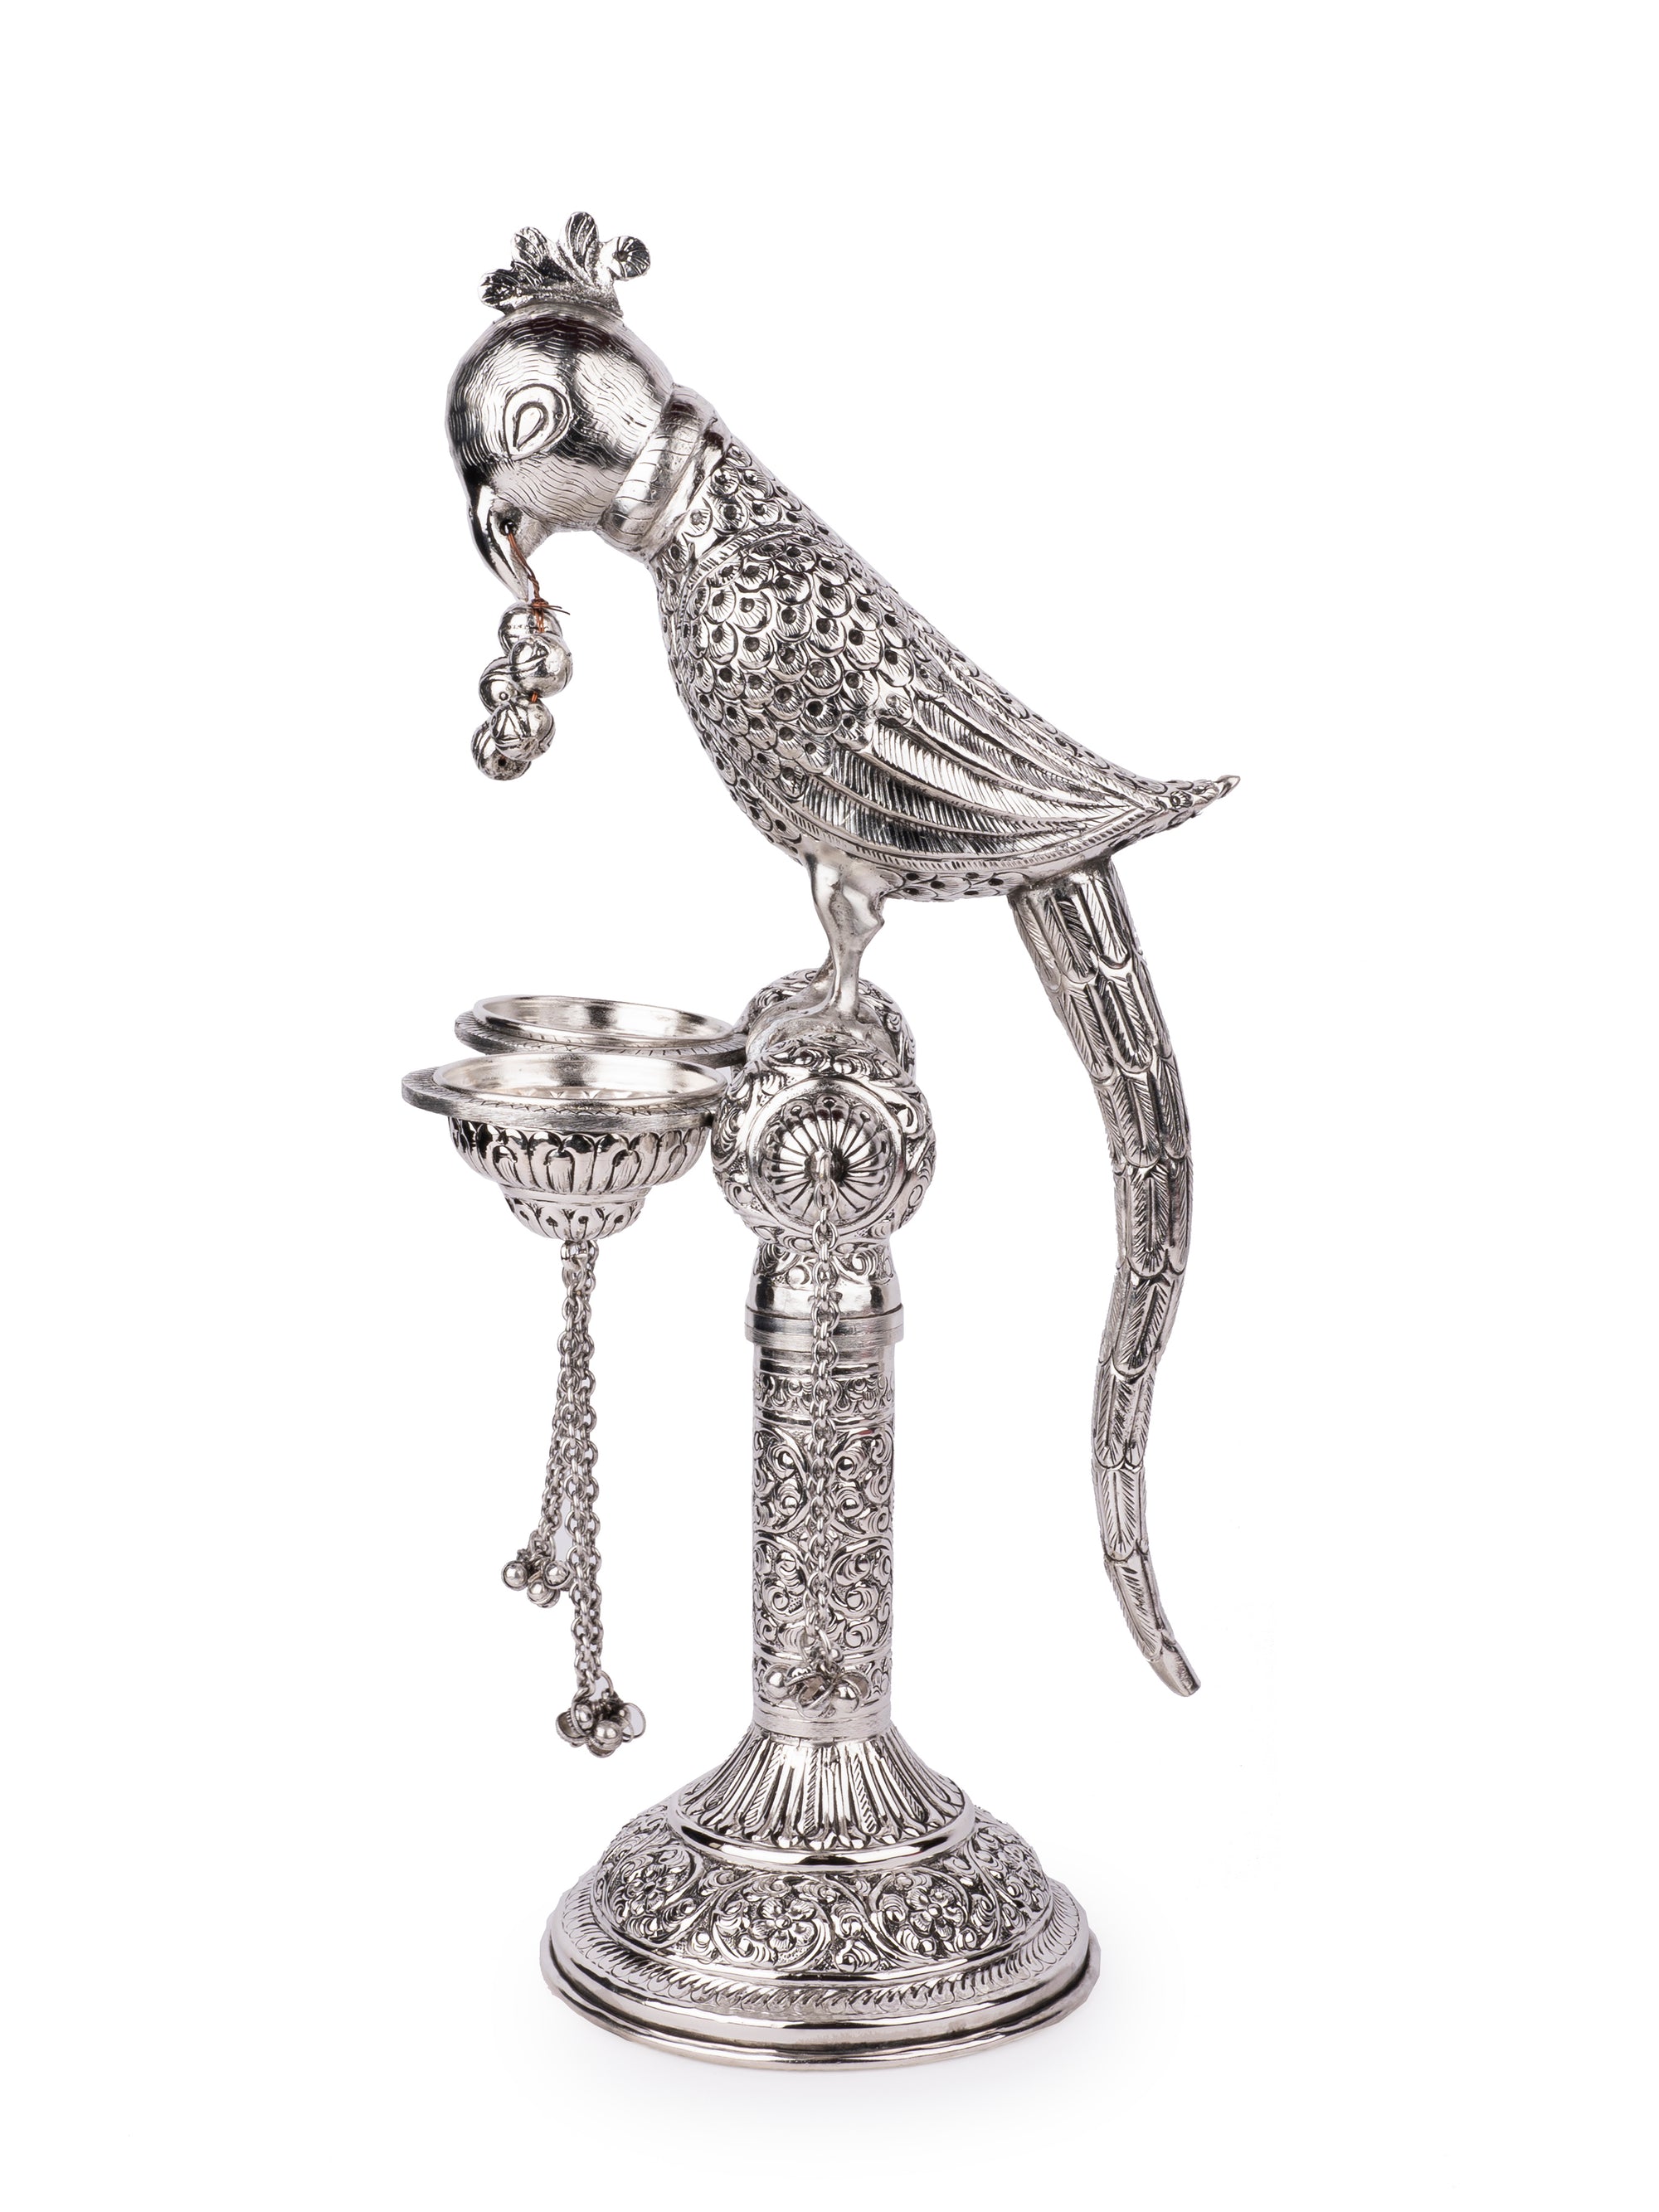 Metal Crafted Macaw Parrot on a Stand - Serve Ware - The Heritage Artifacts